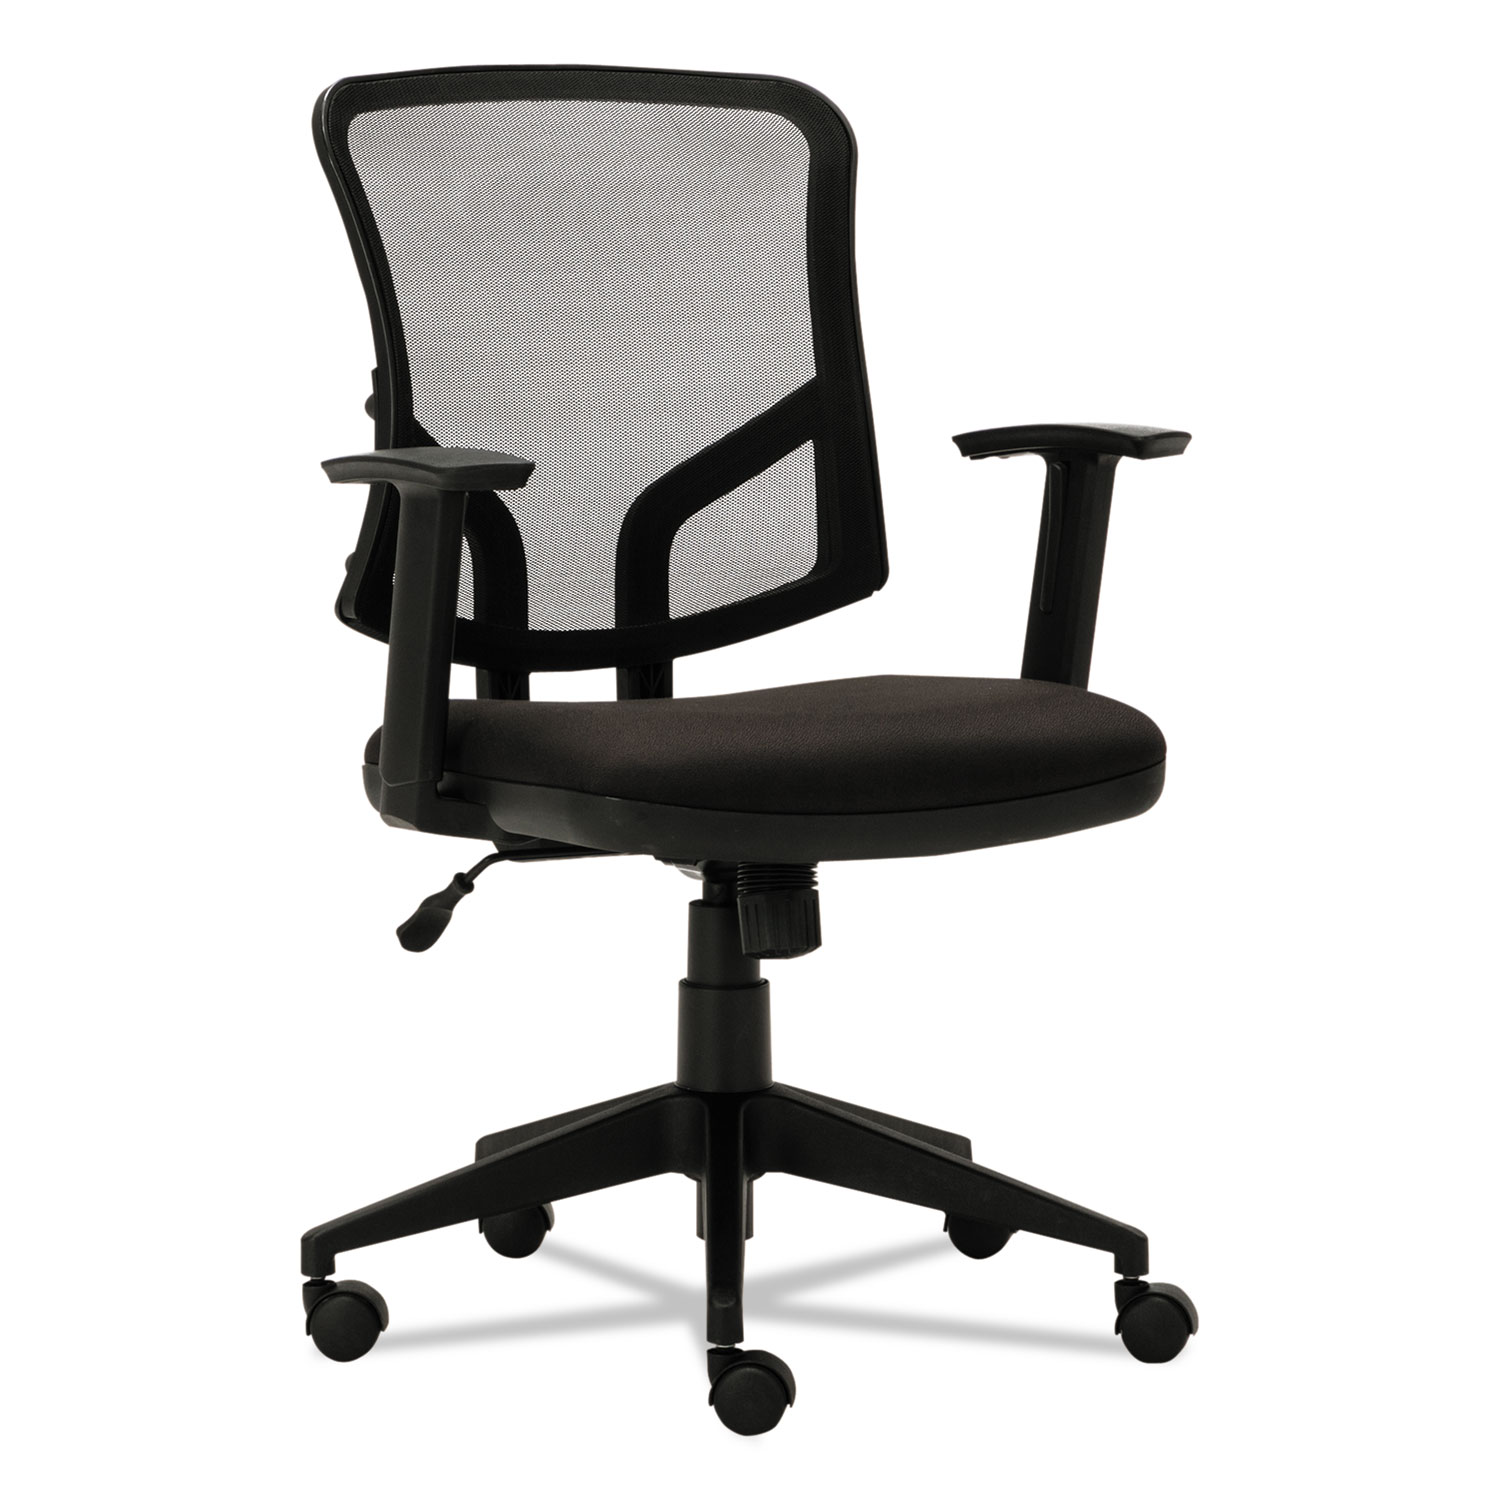  Alera ALETE4817 Everyday Task Office Chair, Supports up to 275 lbs., Black Seat/Black Back, Black Base (ALETE4817) 